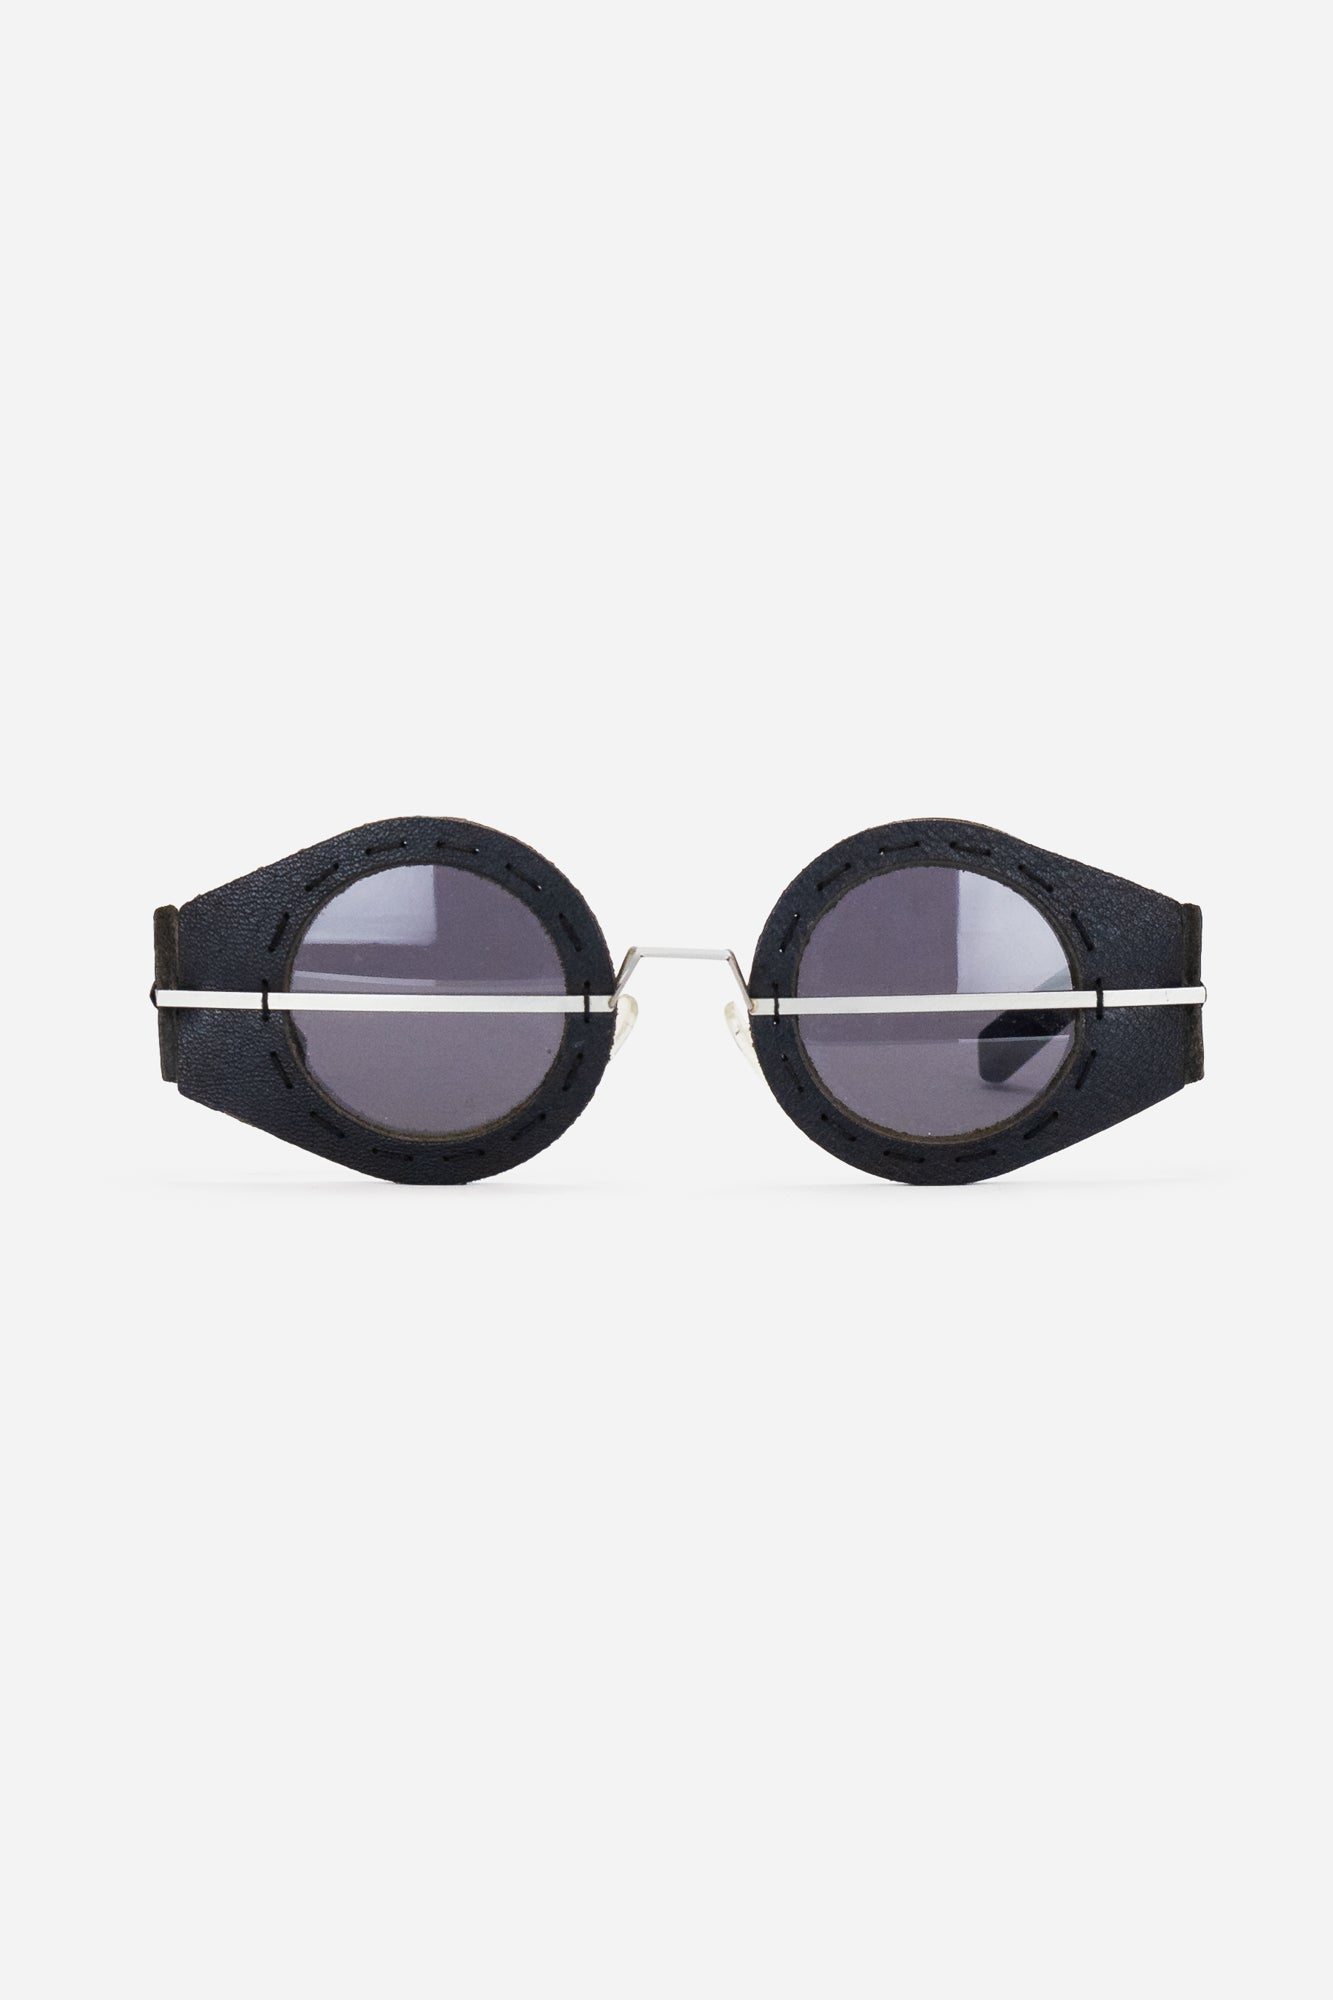 Inuit Limited Edition From Tom Rebl Eye-wear